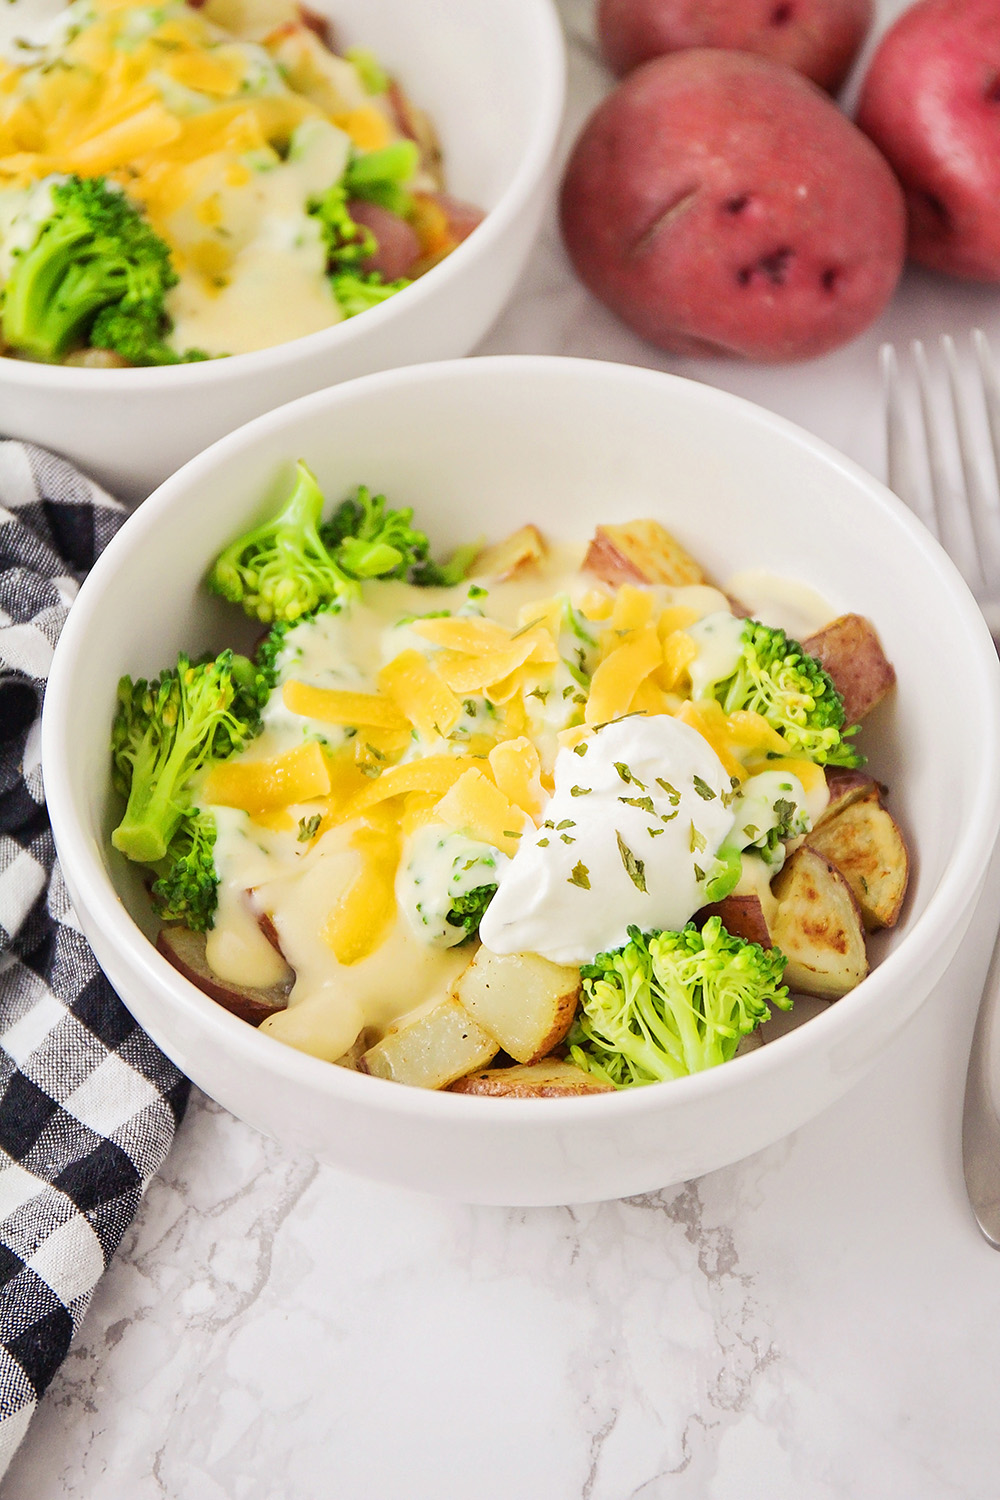 These cheesy broccoli potato bowls are a delicious meatless meal that's easy to make and perfect for a busy weeknight!